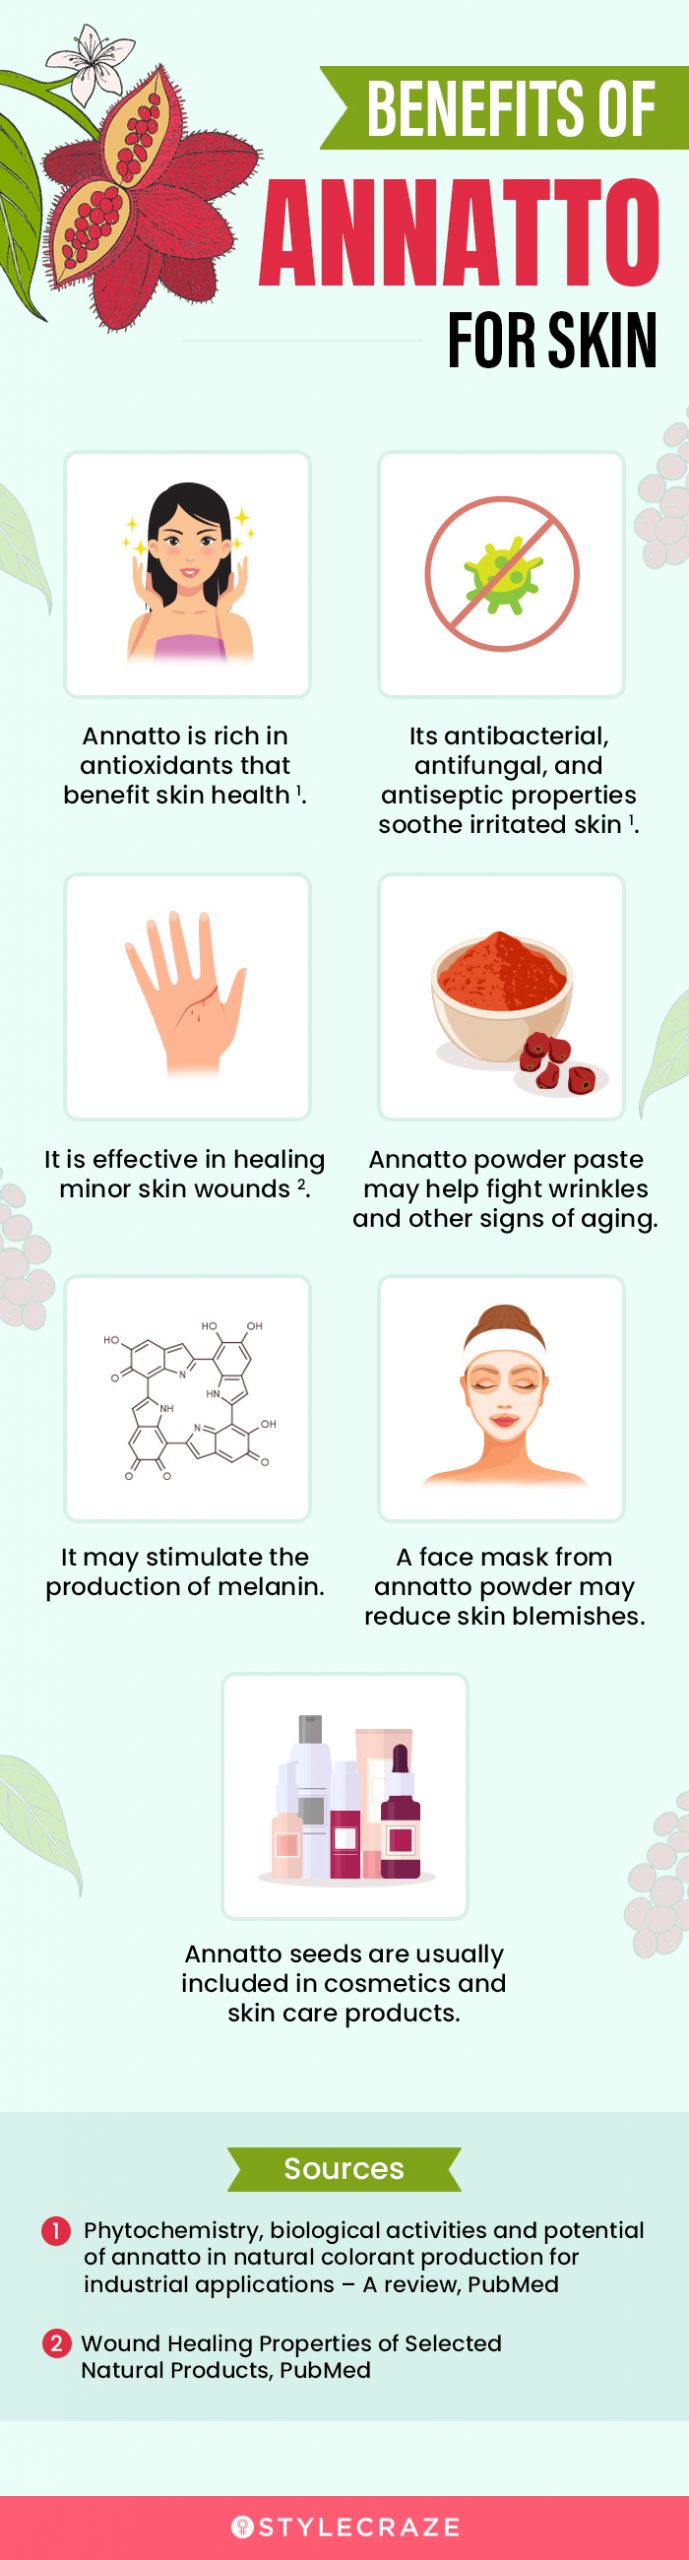 benefitss of annatto for skin (infographic)